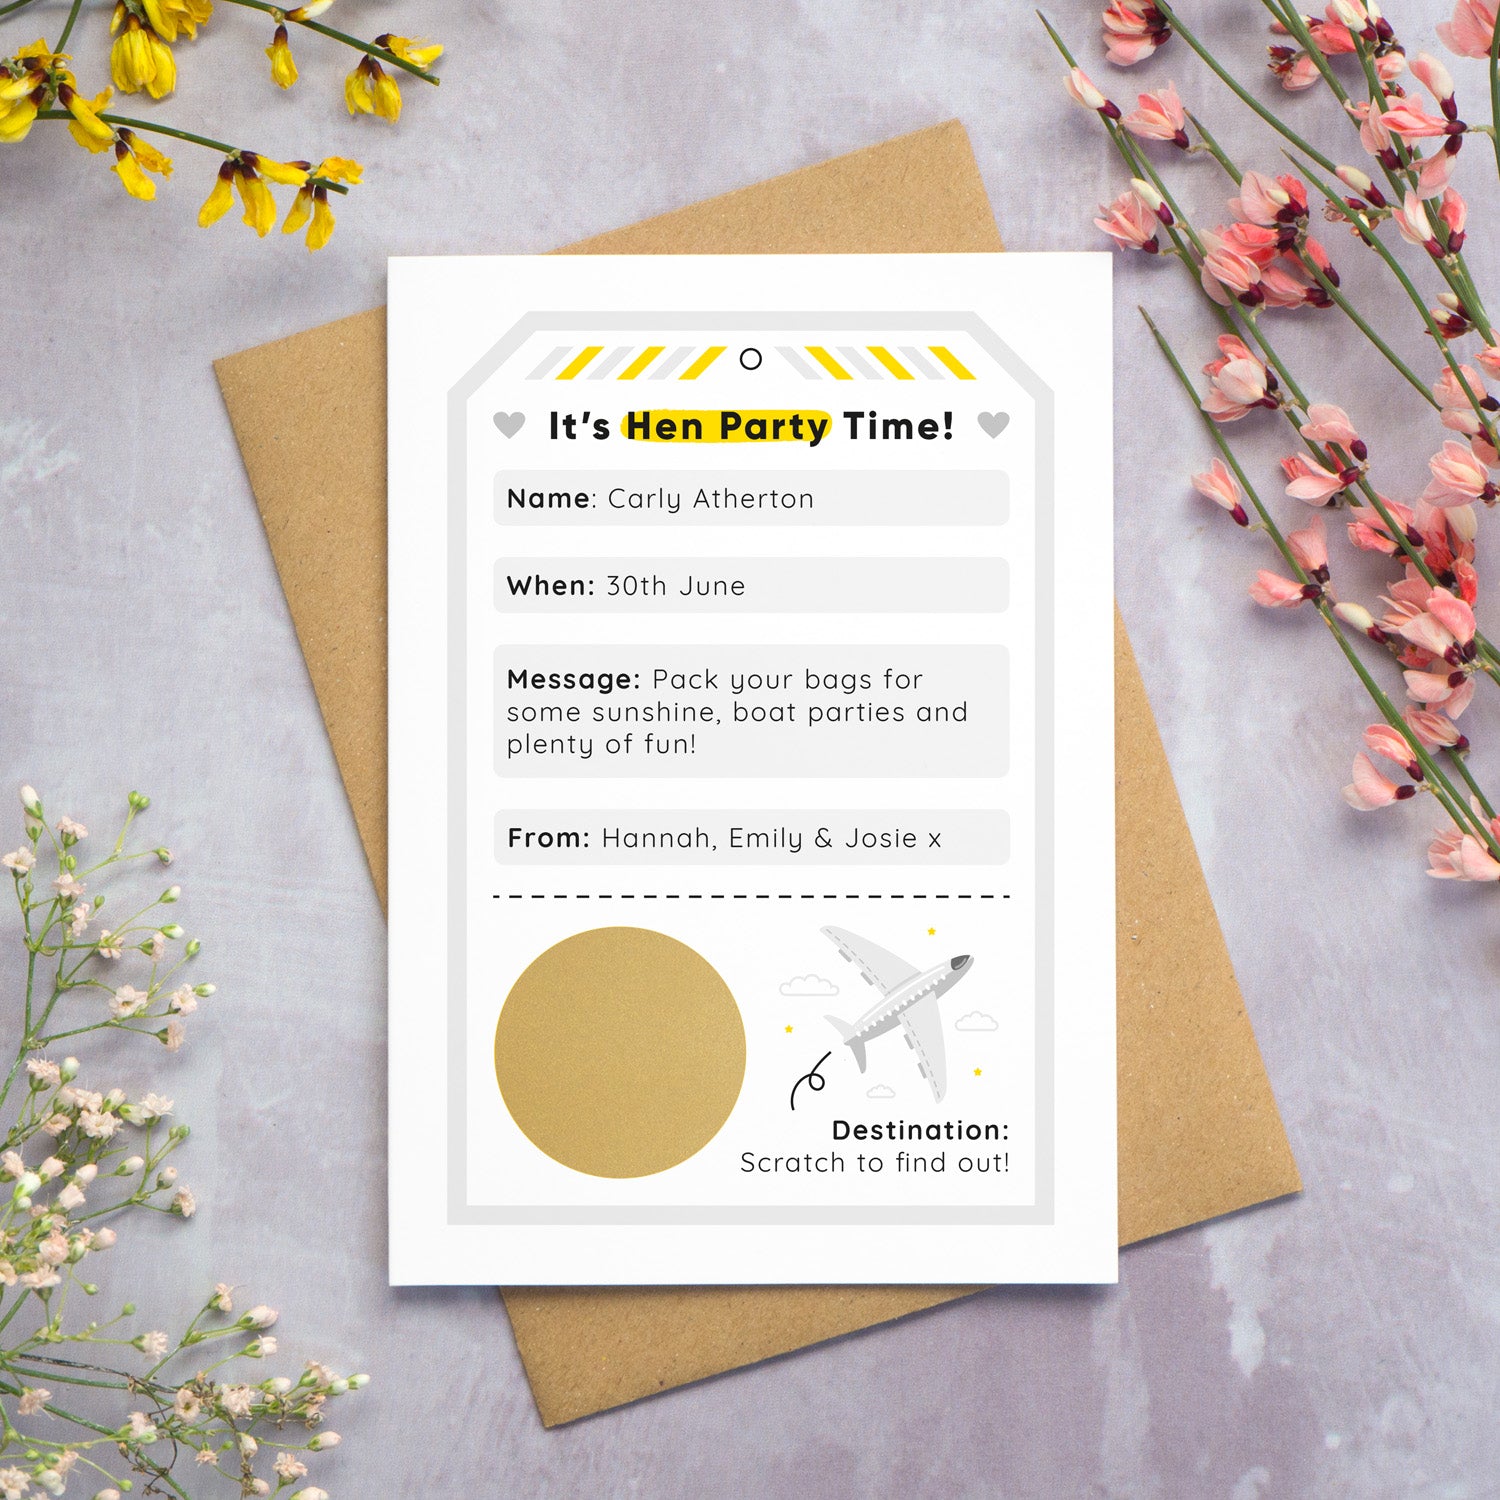 A hen party scratch and reveal card featuring a grey luggage tag and scratch off gold circle that has been photographed on a grey background with yellow, white and pink flowers. The card is lying on a Kraft brown envelope. The scratch off panel has not yet been scratched off to reveal the hen do destination.